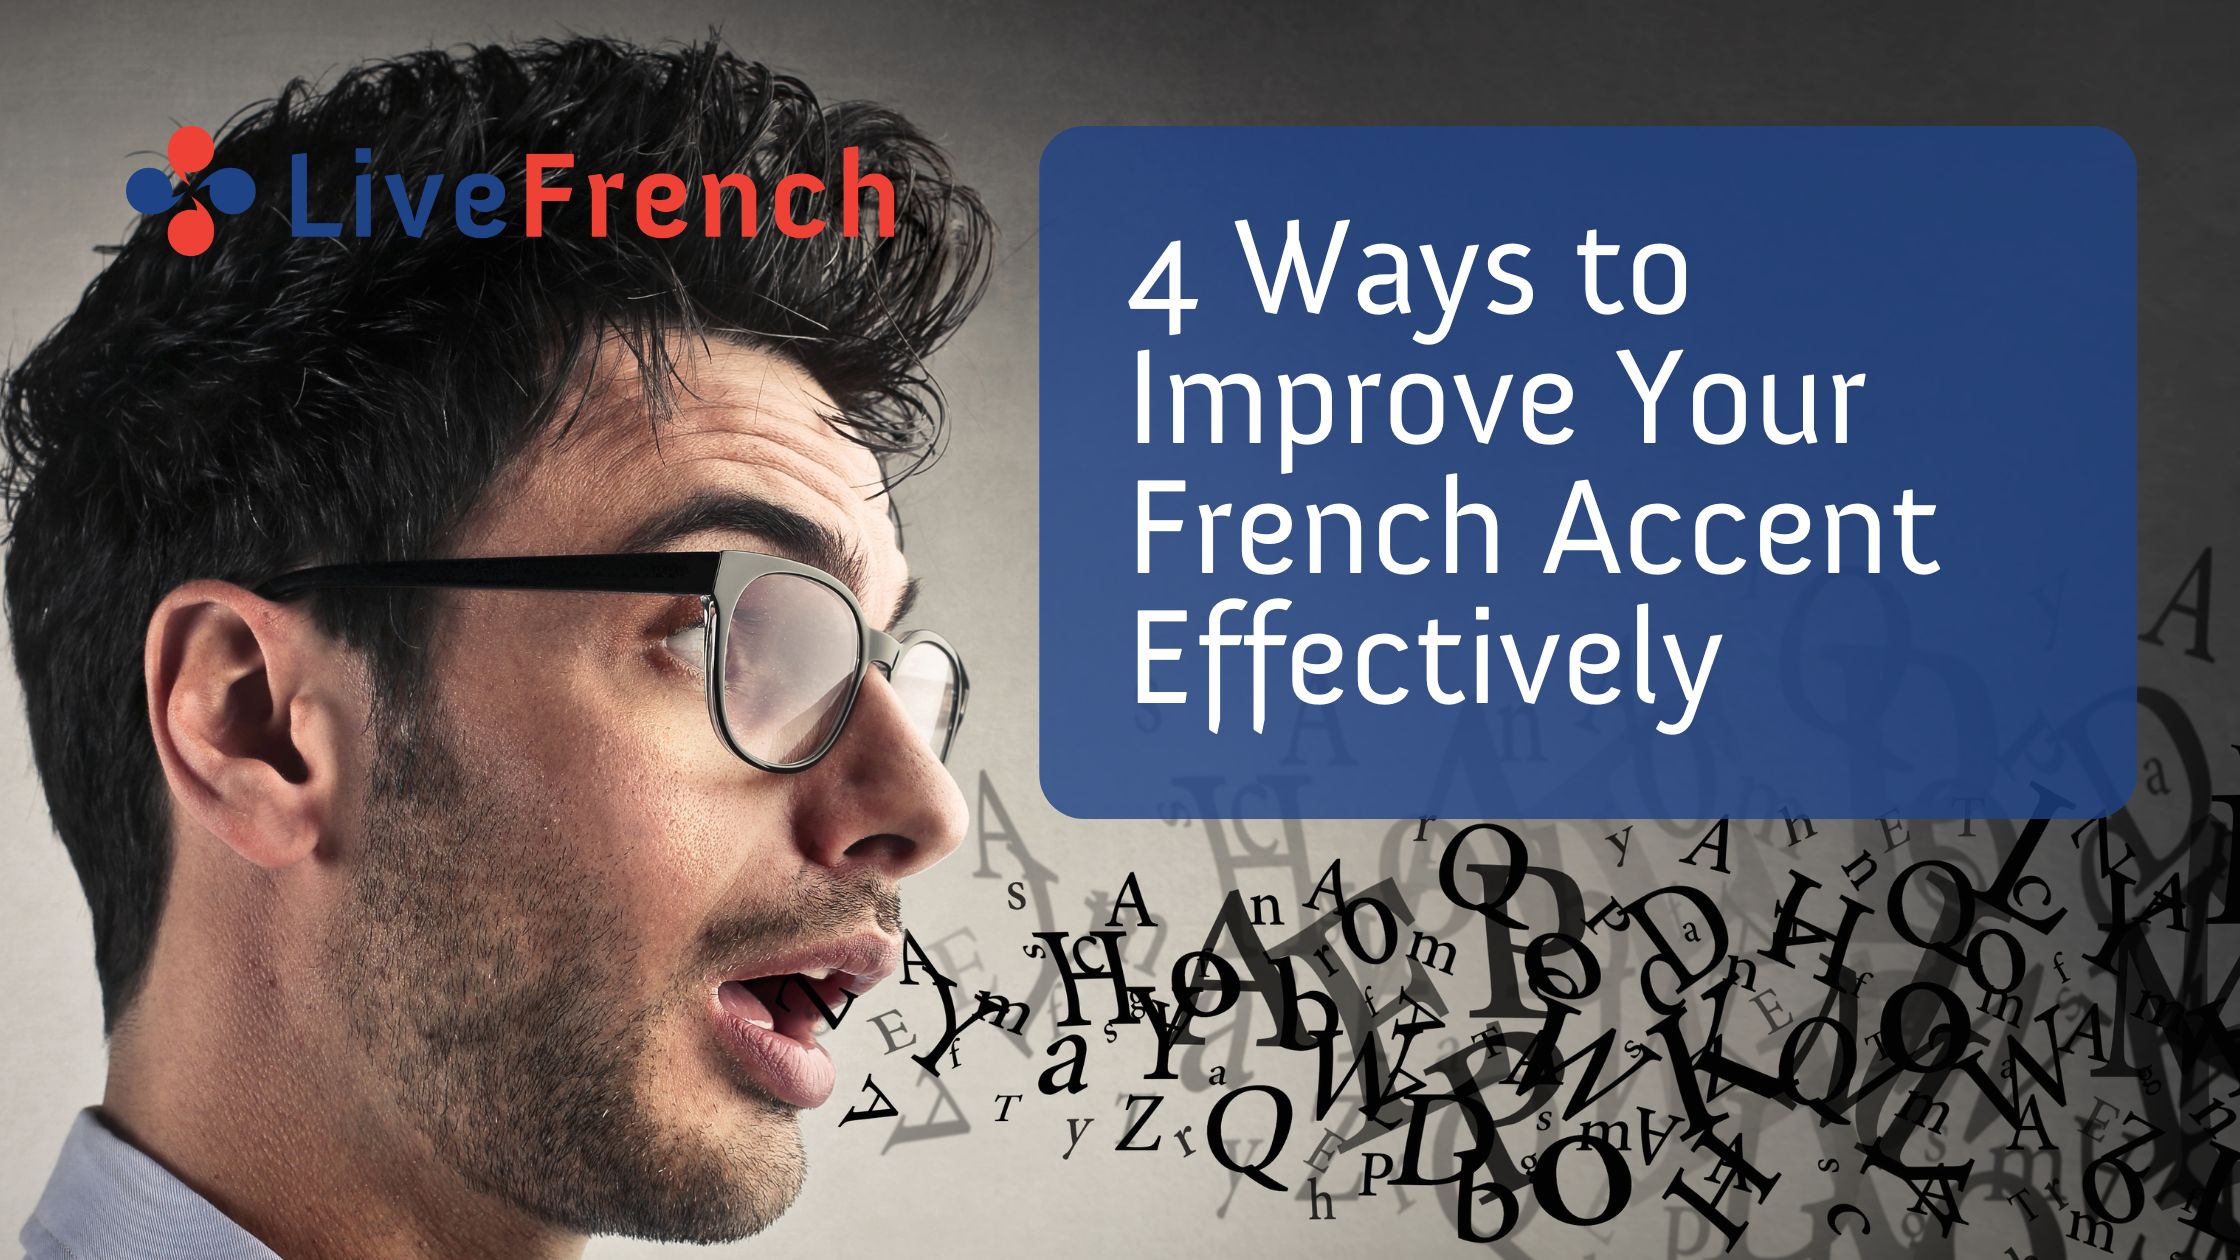 Improve your French Accent